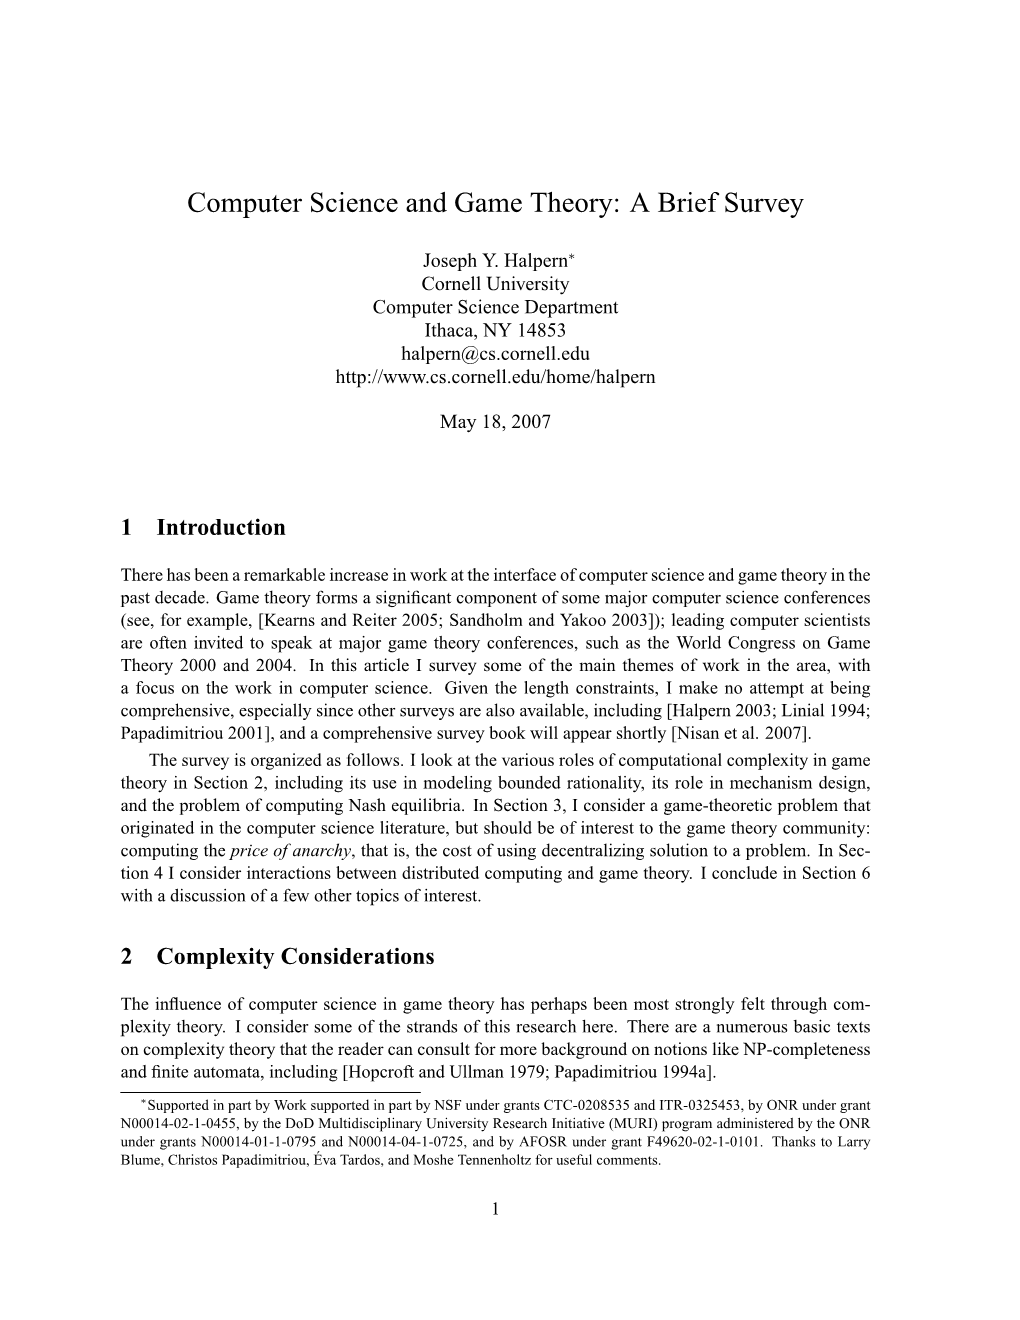 Computer Science and Game Theory: a Brief Survey